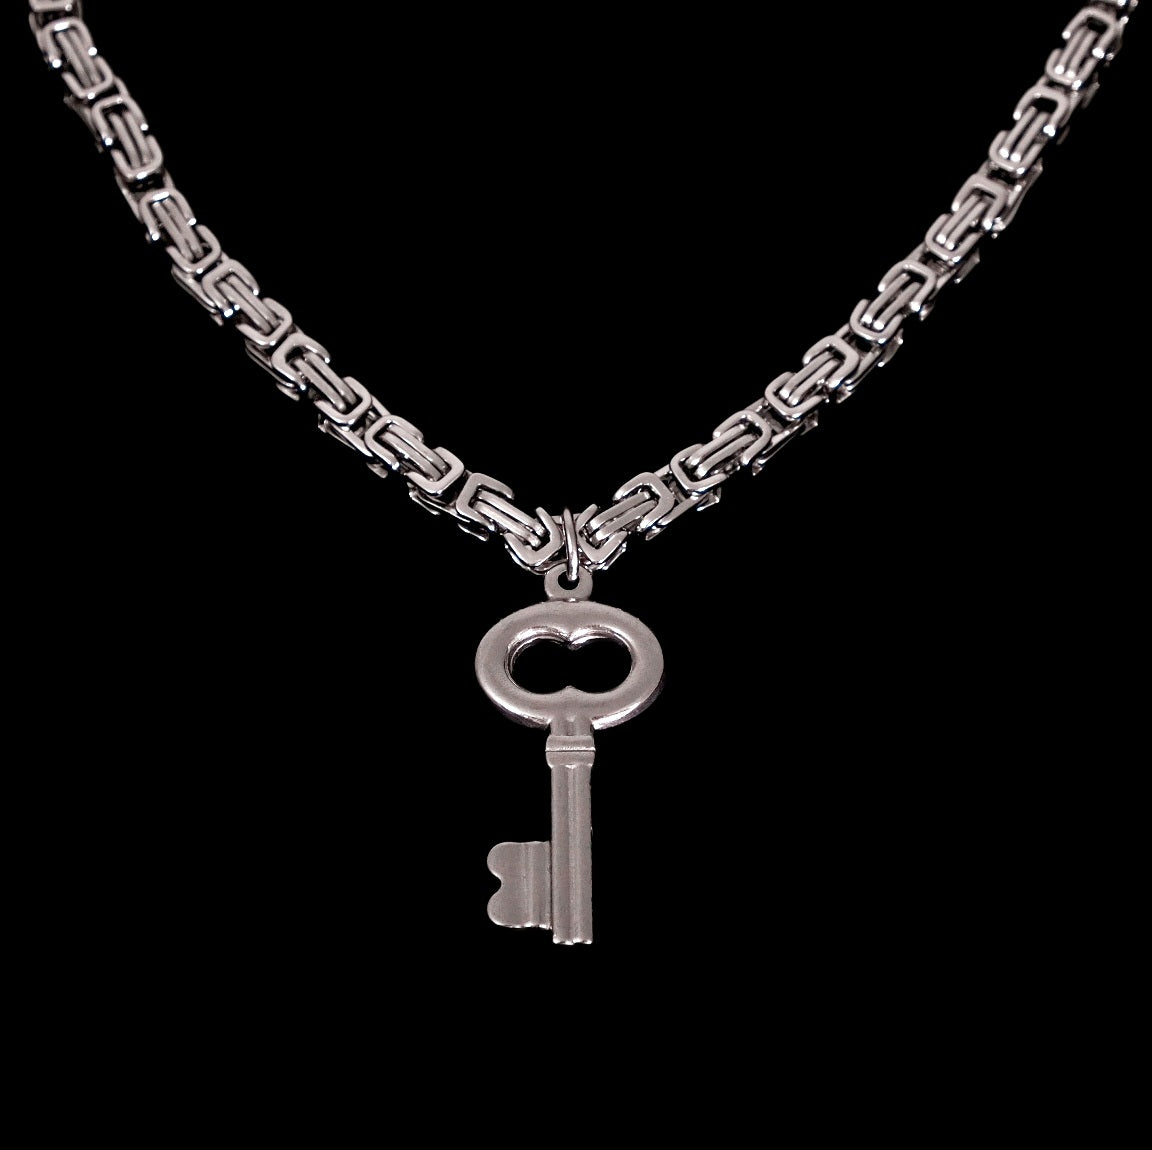 2 pcs/lots Lock Key Necklace For Women New Fashion Delicated Popular  Pendant Necklace Friendship Necklace Neck Jewelry Wholesale